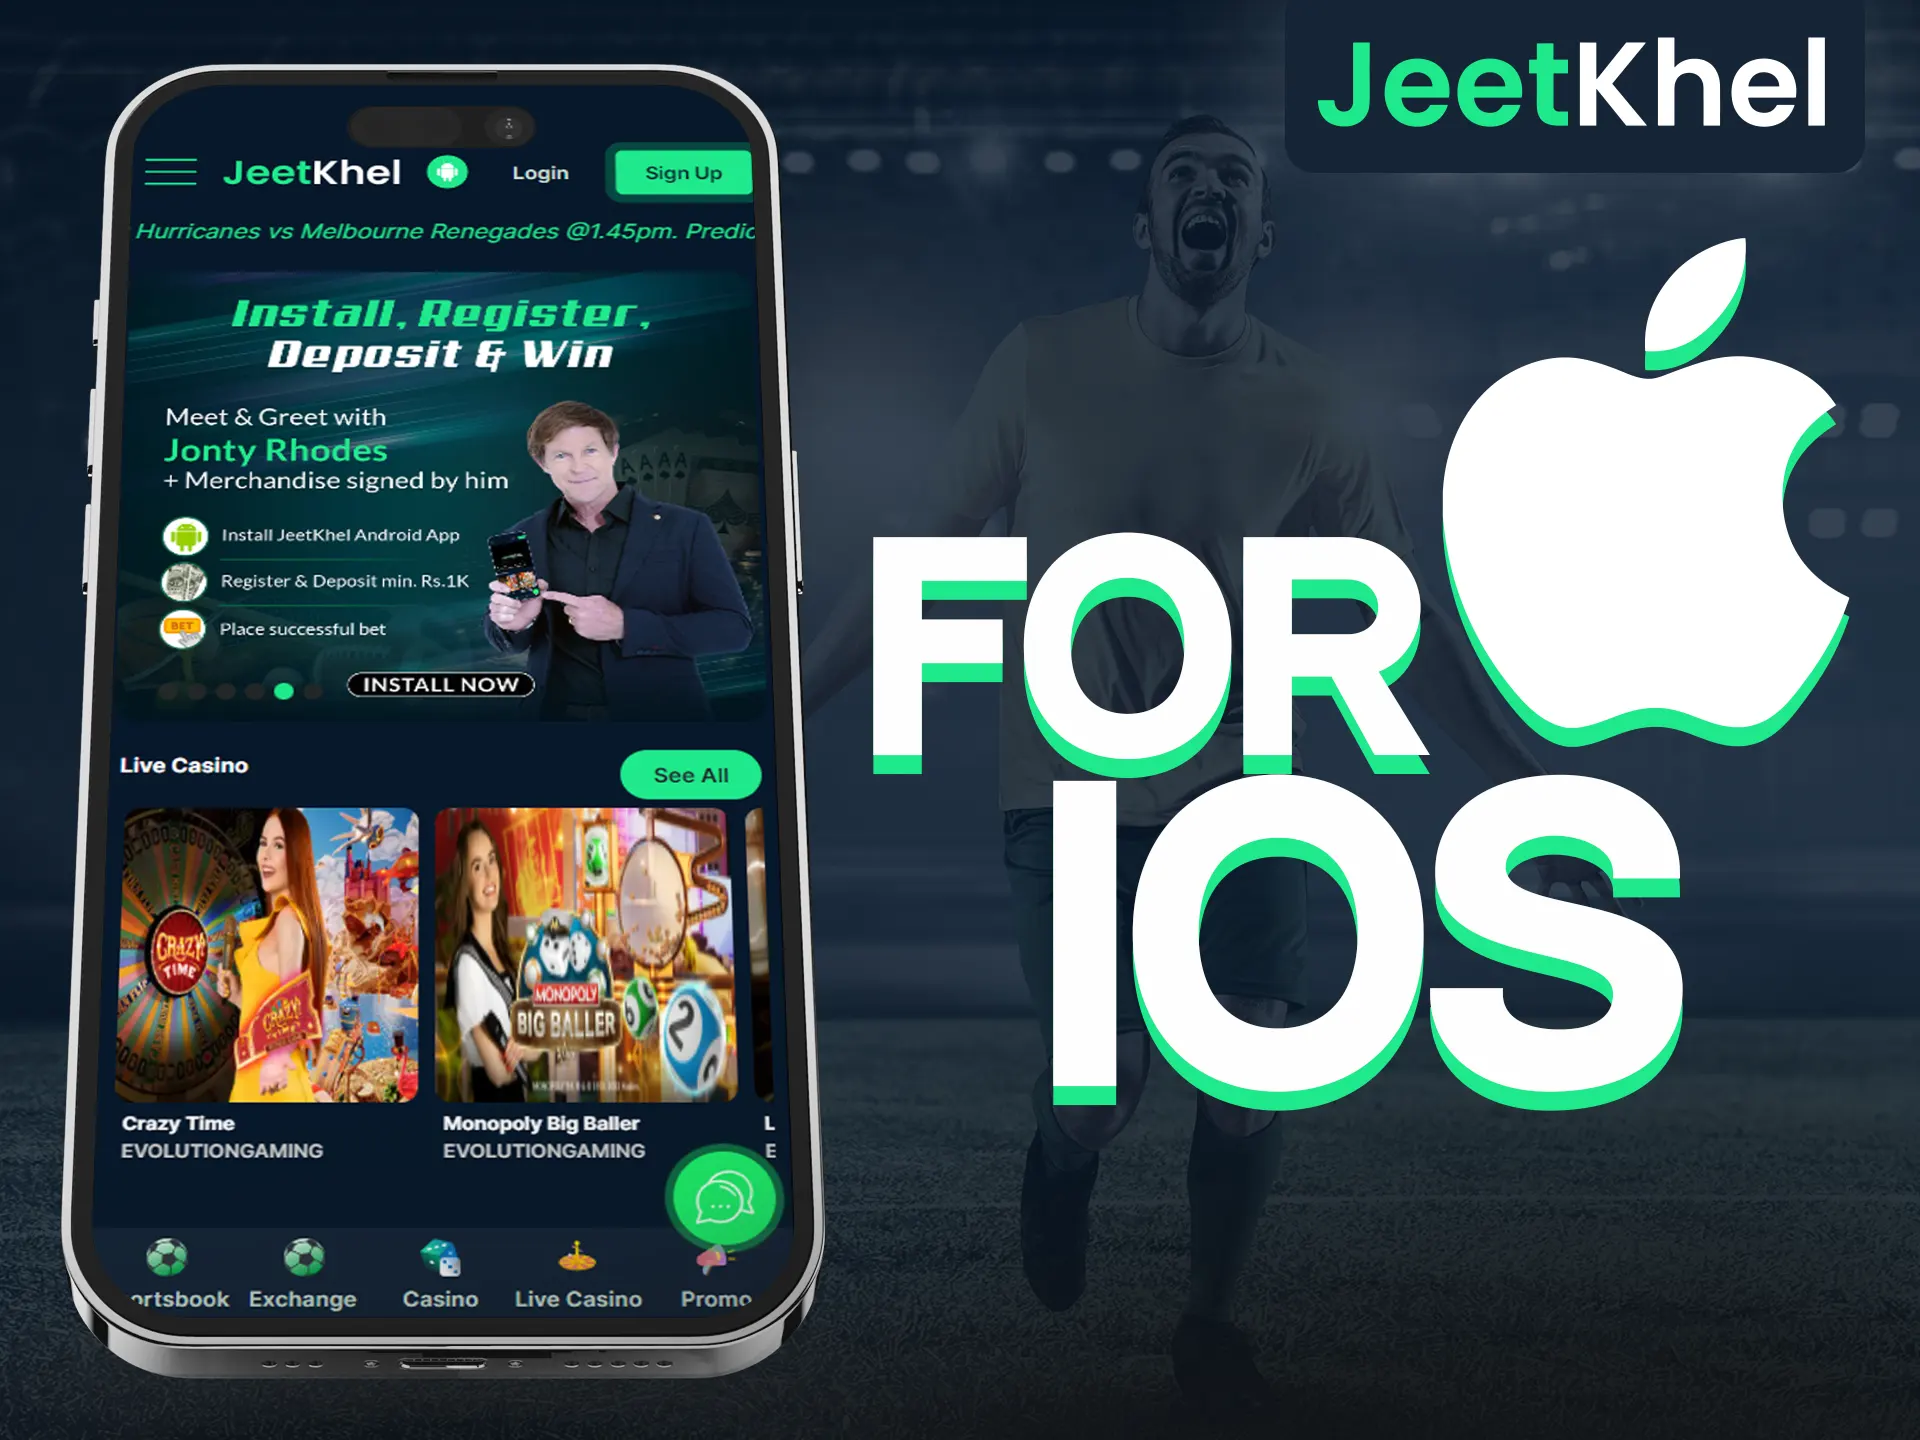 Bet and play on the Jeetkhel website using your mobile device.